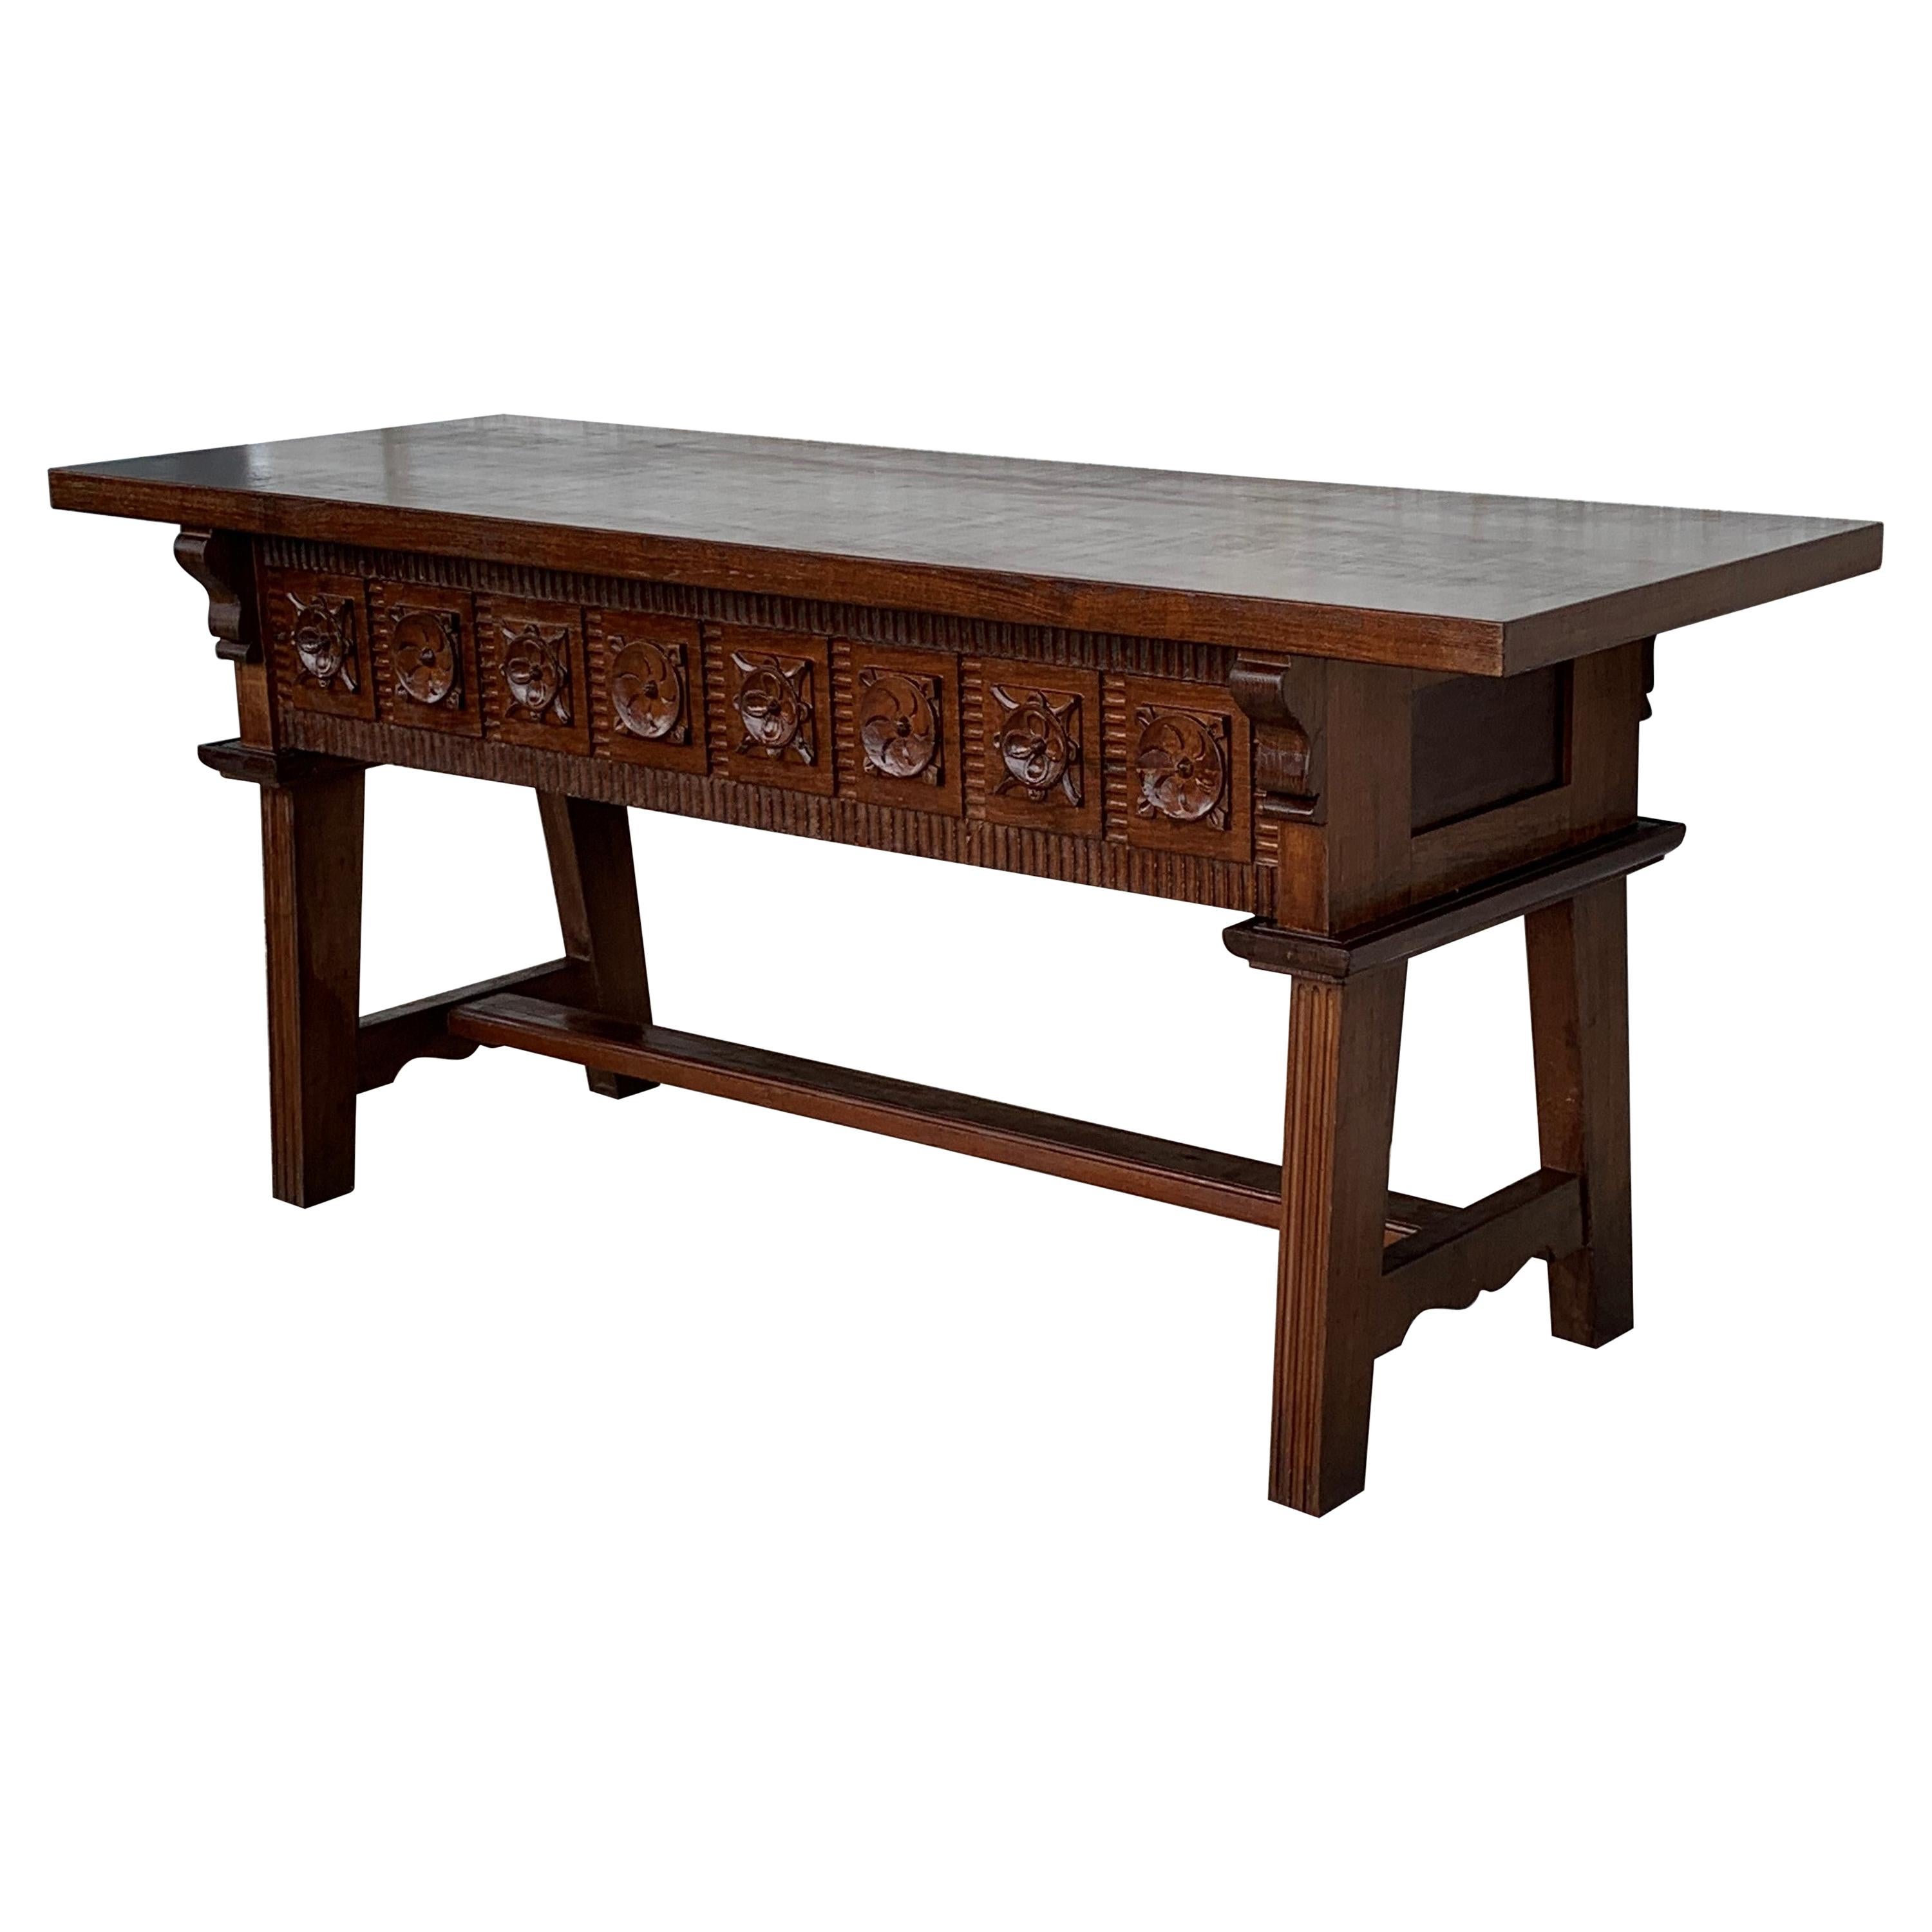 20th Century Large Spanish Baroque Style Carved Walnut Refectory Table